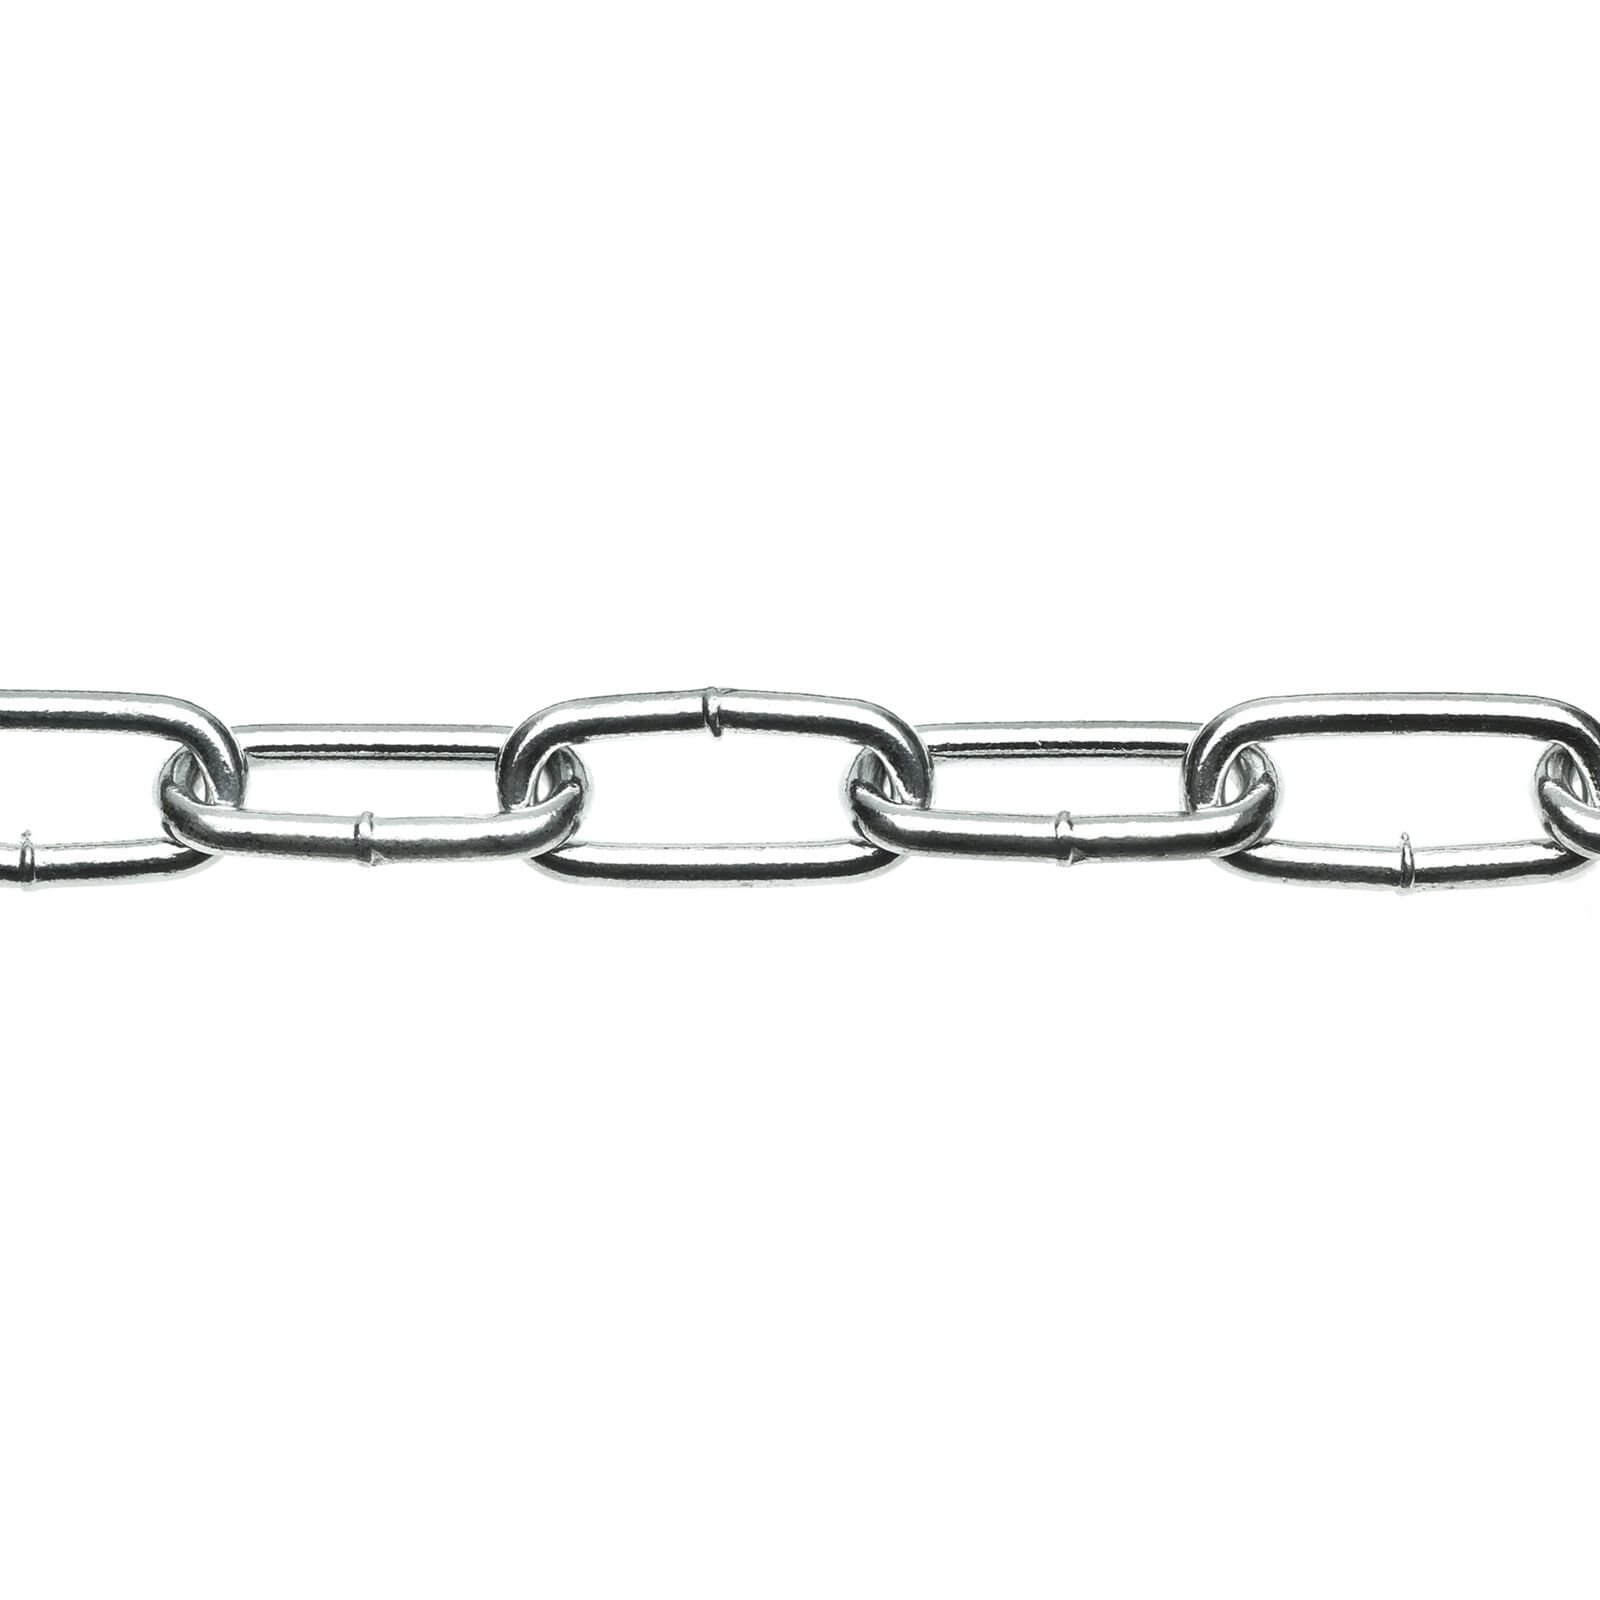 Long Link Welded Chain - Bright Zinc Plated - 6mm